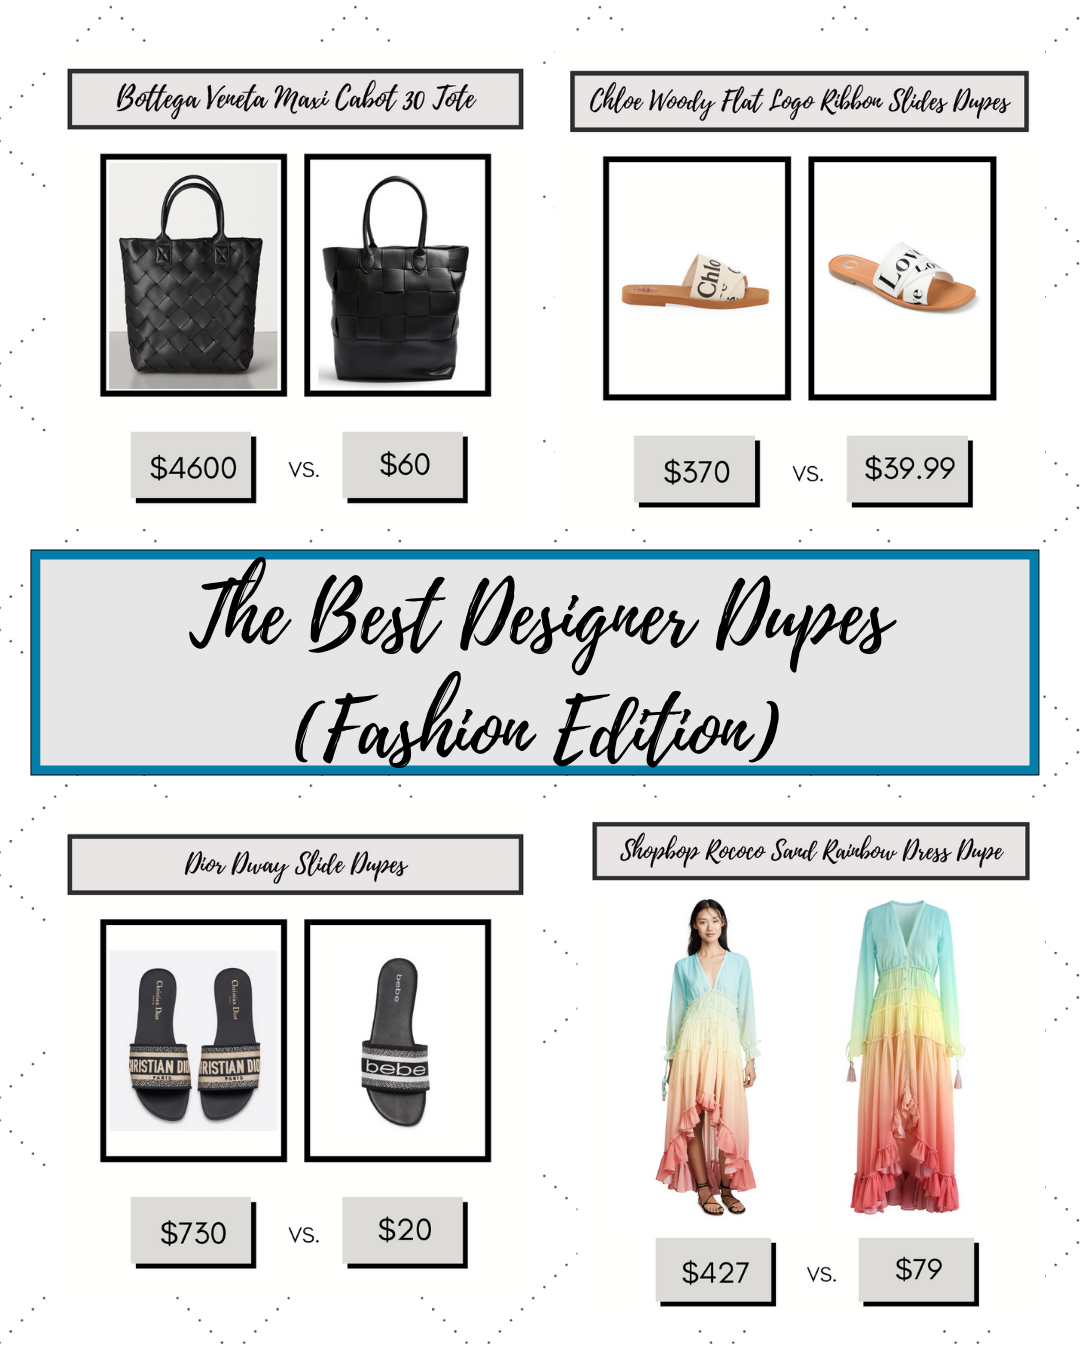 The Best Designer Dupes of 2021 (Fashion Edition)